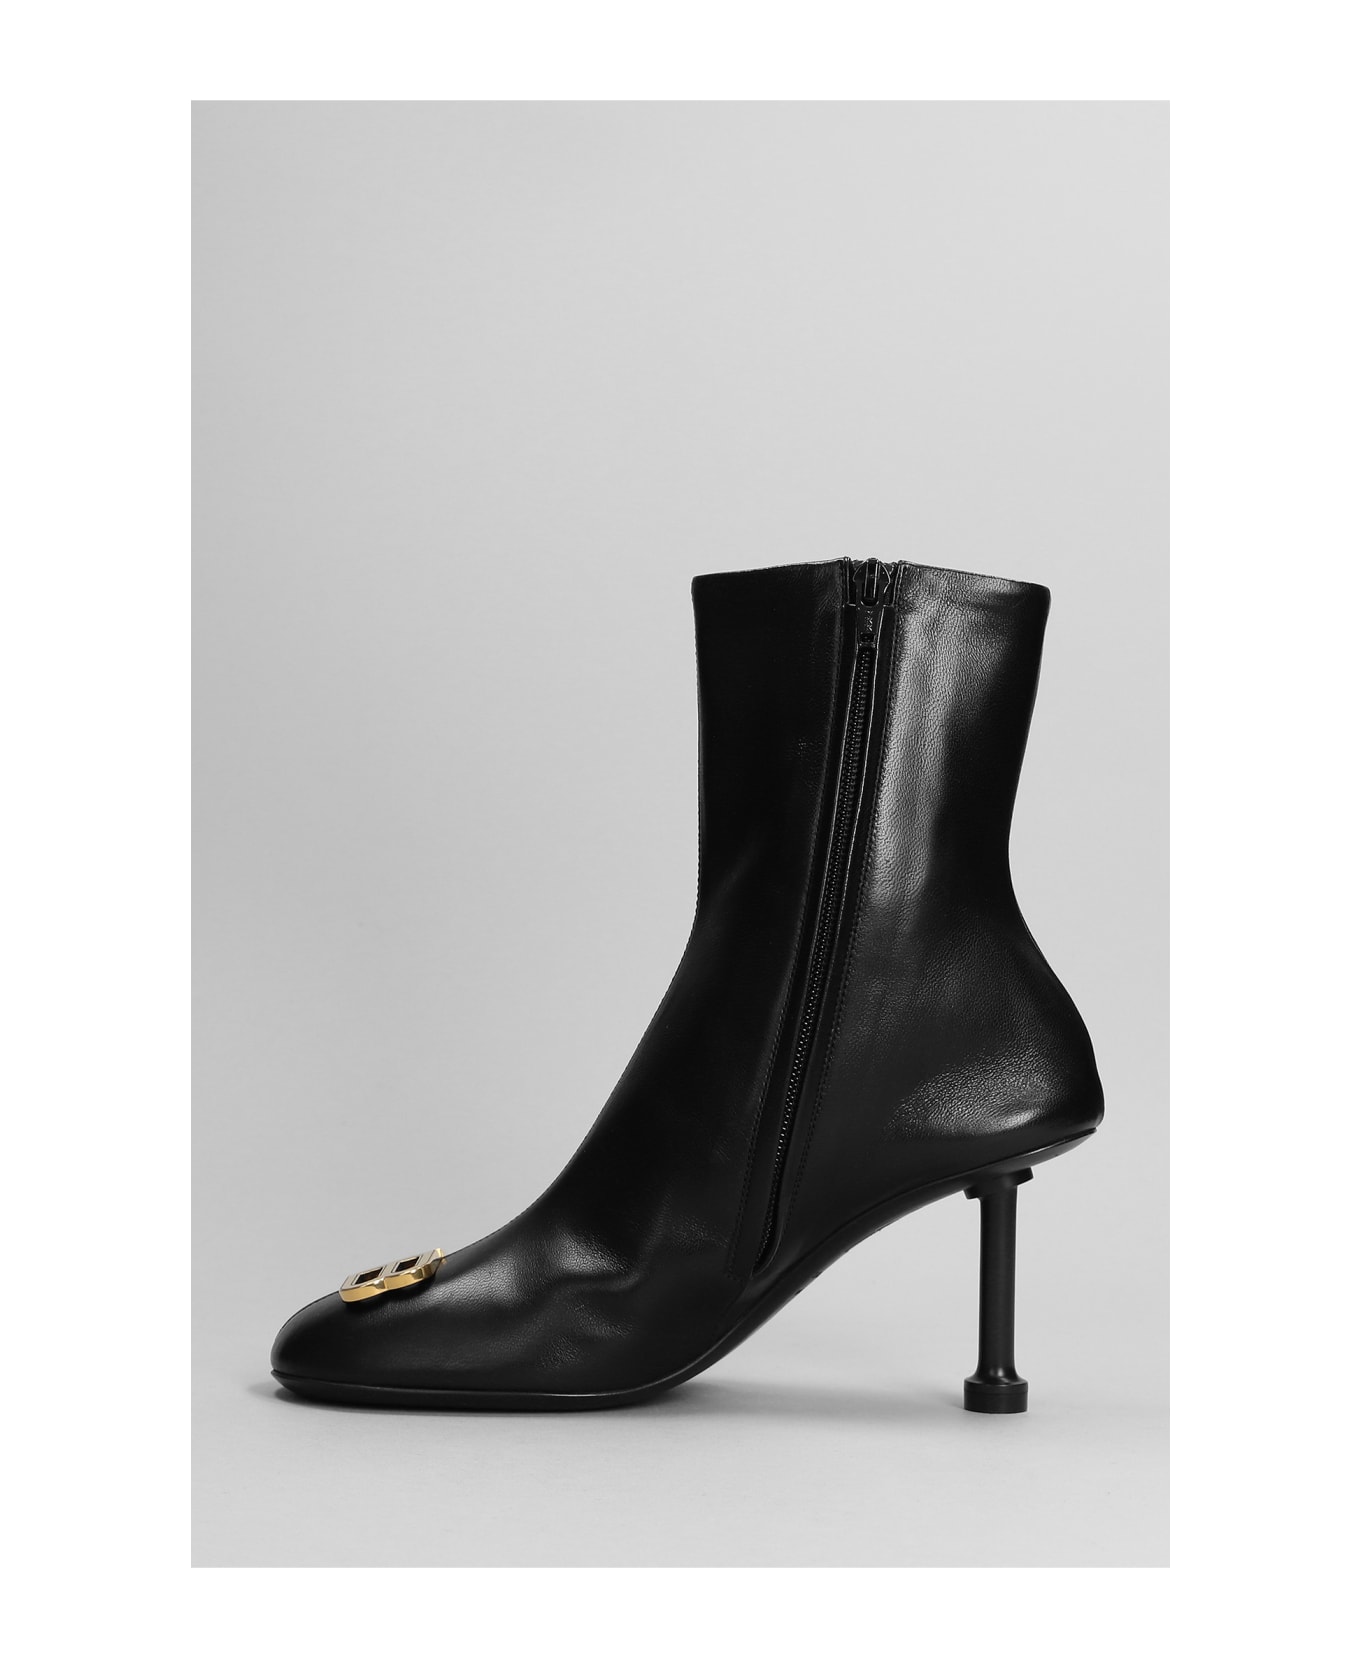 Balenciaga High Heels Ankle Boots In Black Leather - black